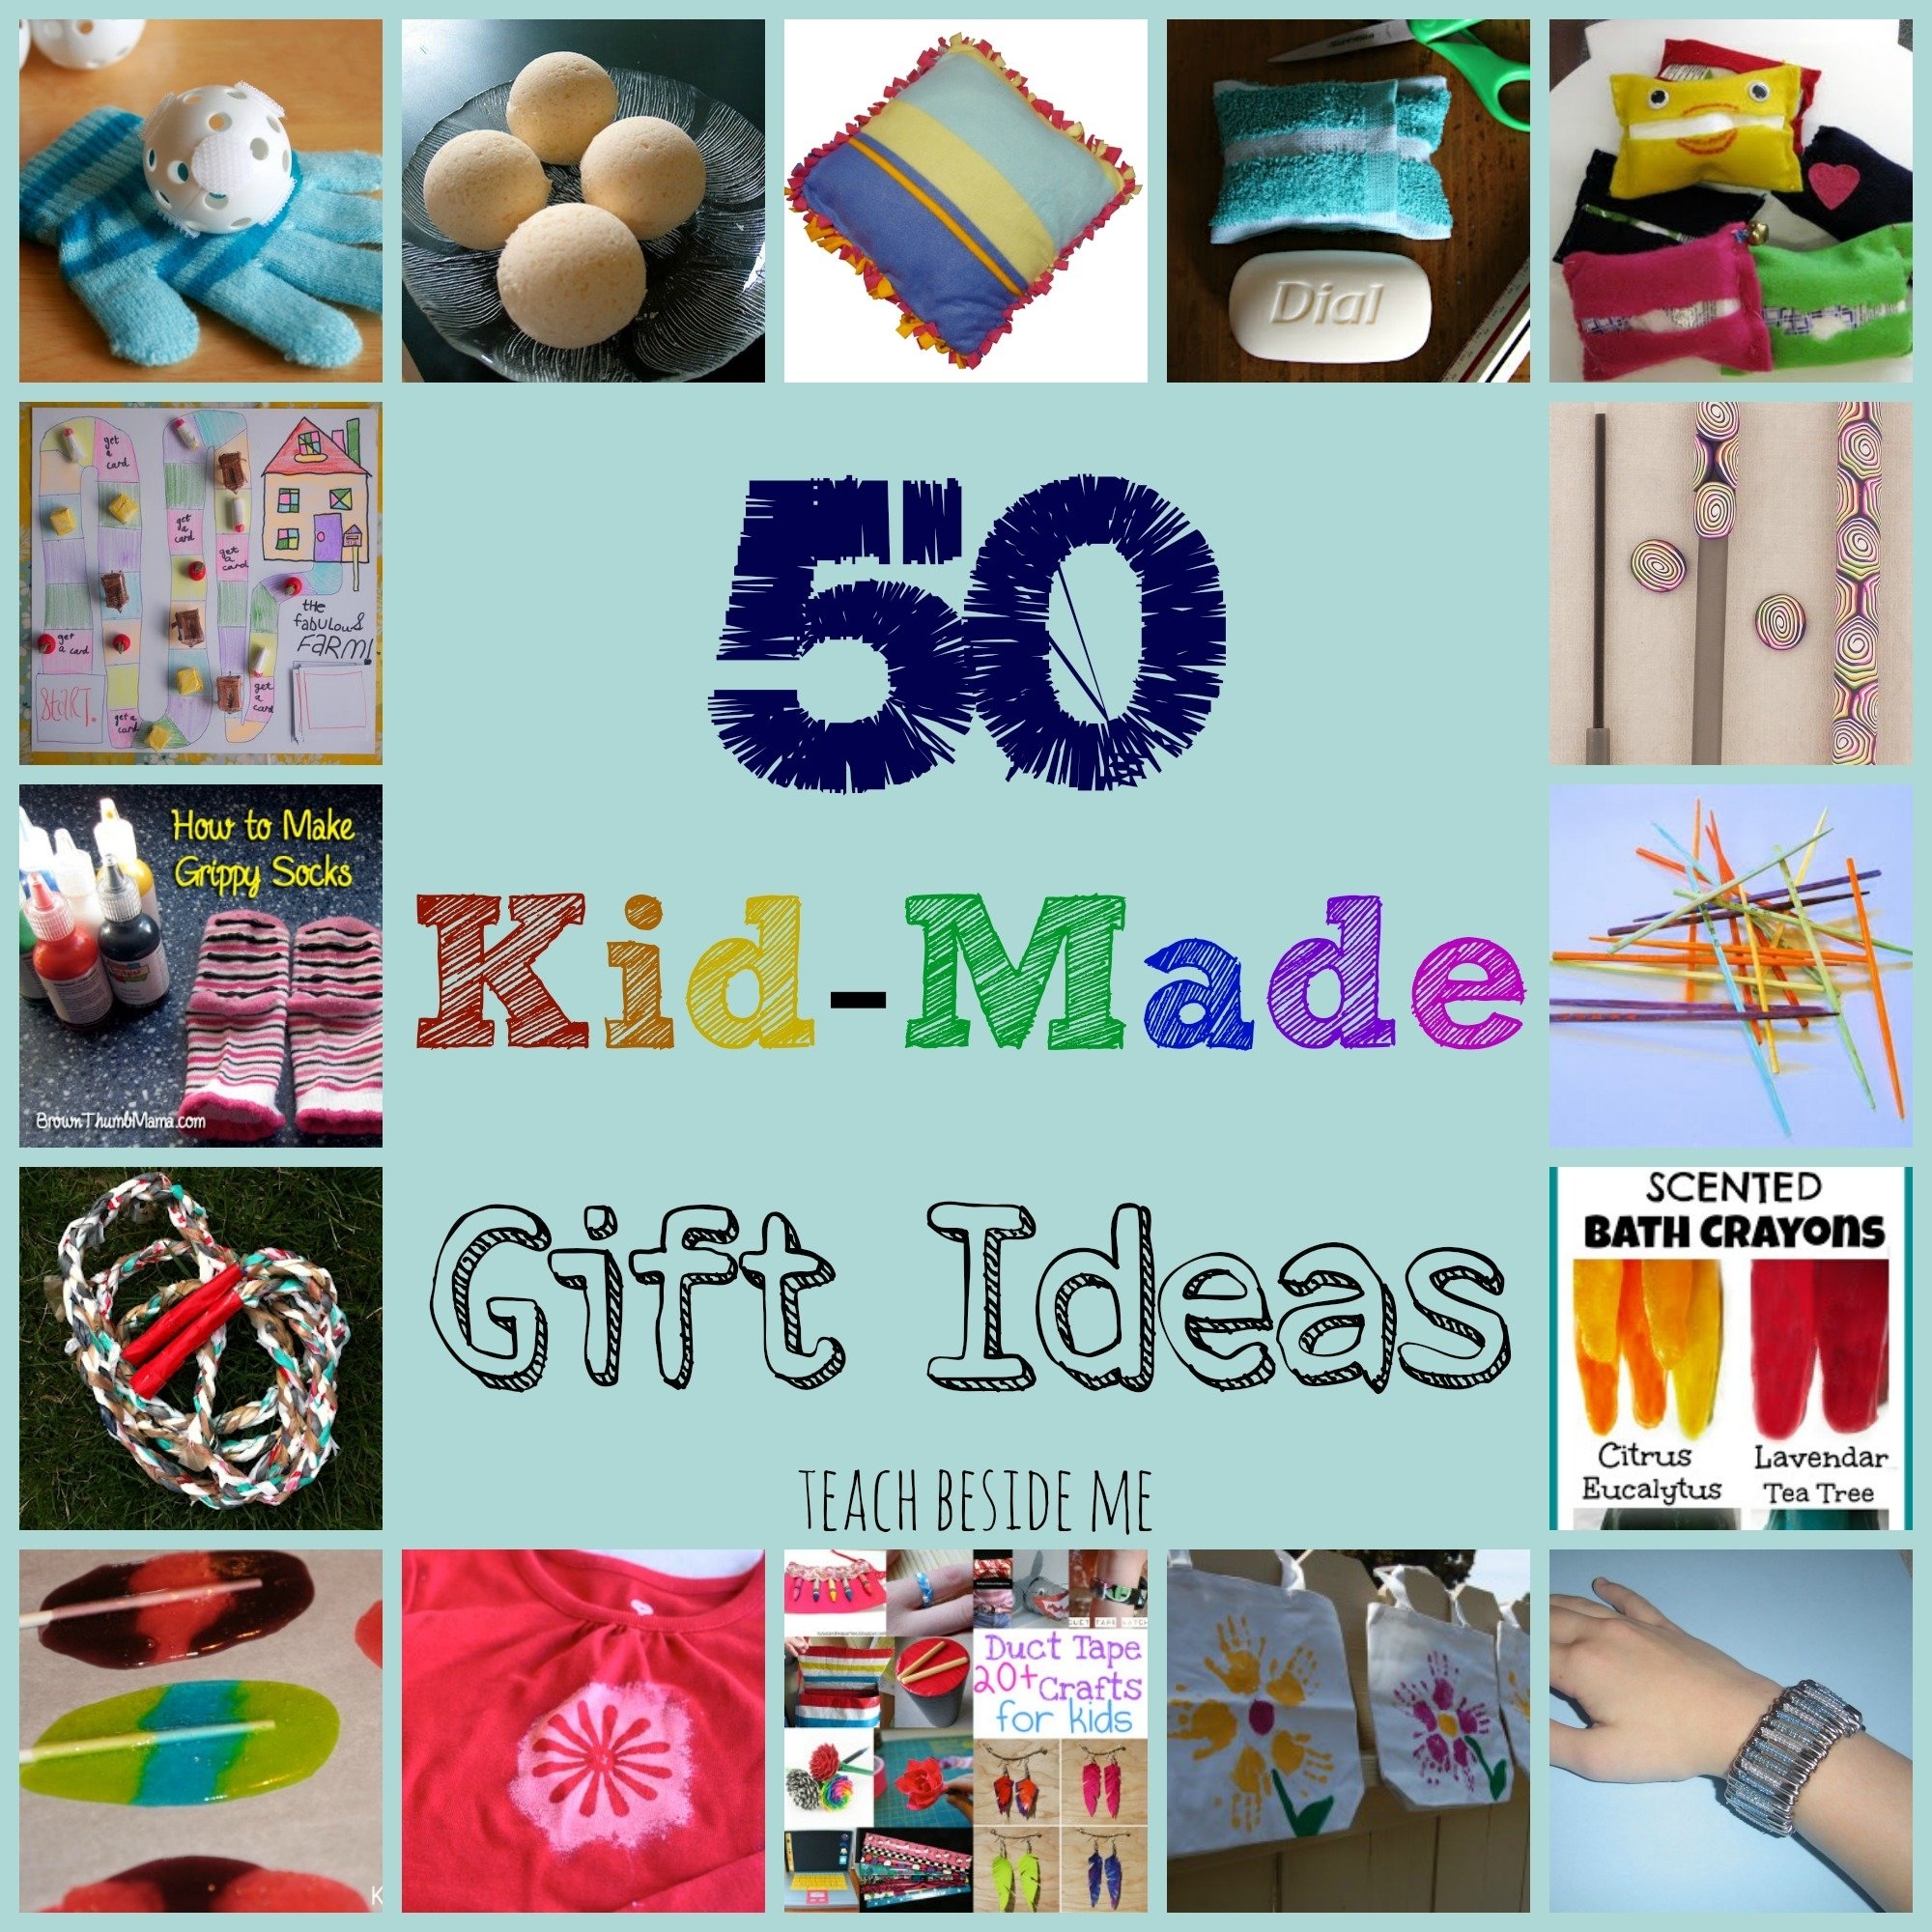 10 Amazing Christmas Present Ideas For Brother kid made gift ideas for family teach beside me 10 2022